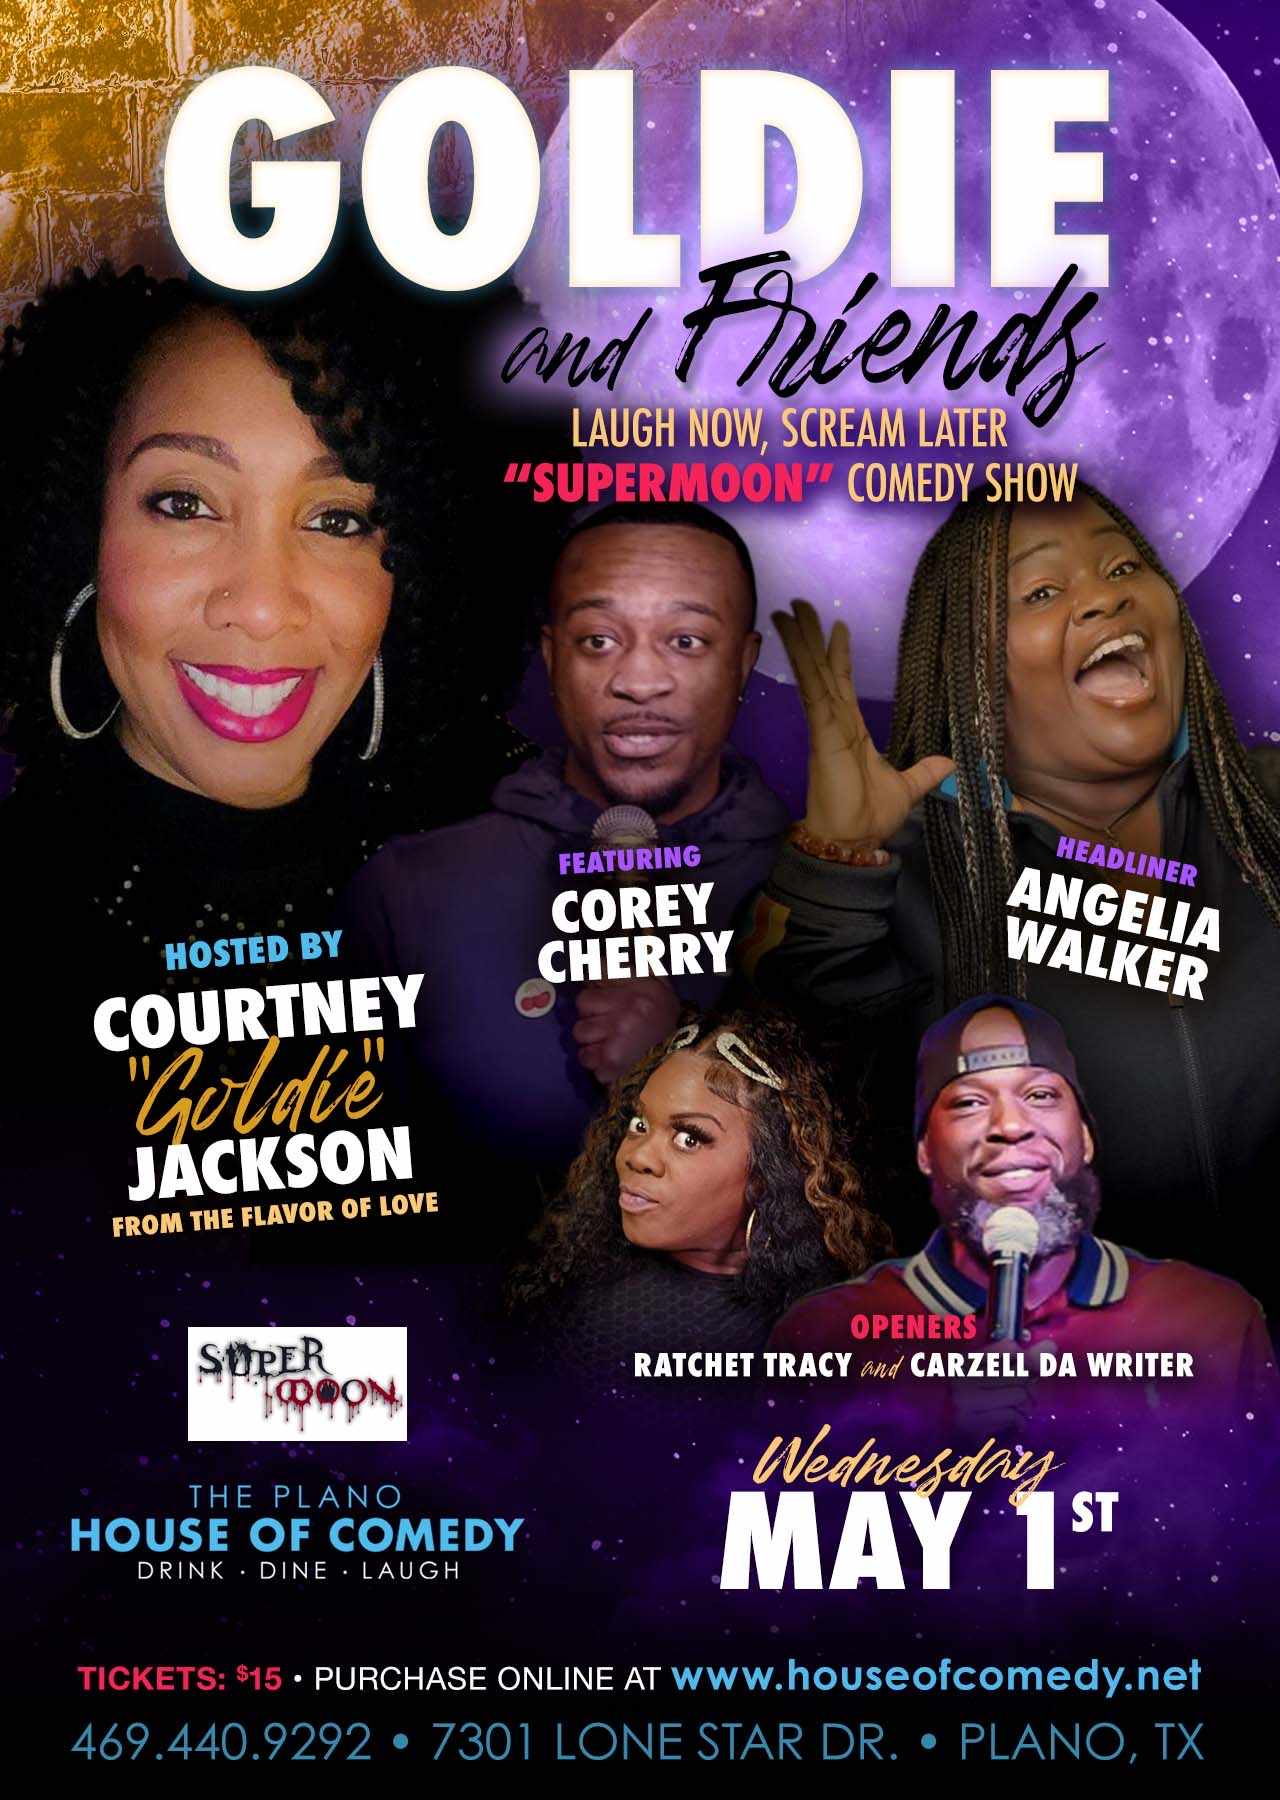 Goldie & Friends Laugh Now, Scream Later "SuperMoon" Comedy Show